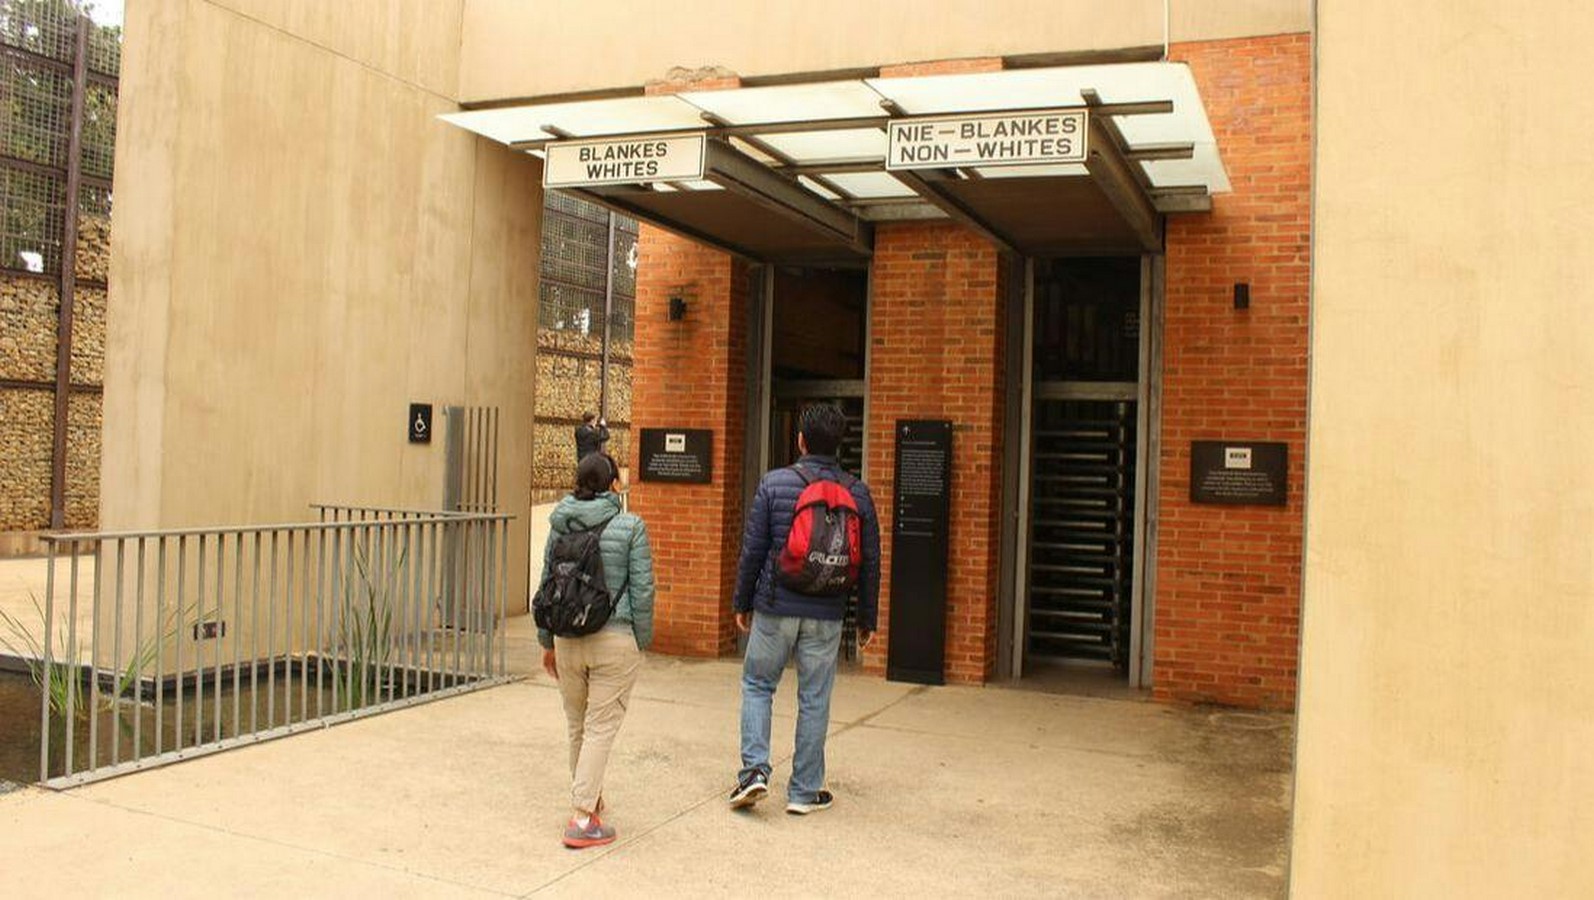 Museums of the World: Apartheid Museum in Johannesburg - Sheet3